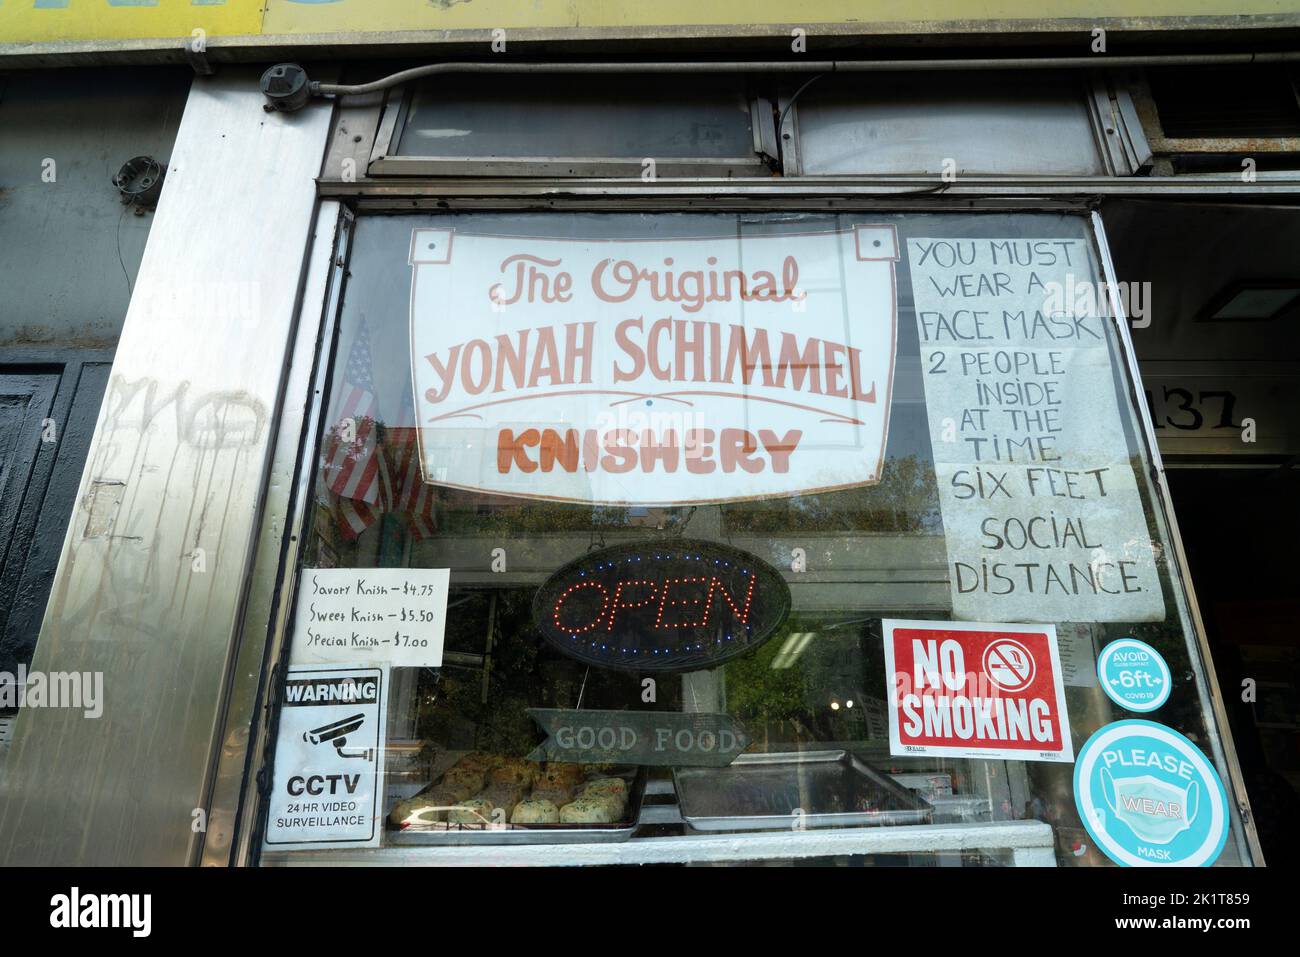 The Yonah Schimmel knish bakery has been at 137 East Houston St. on Manhattan's Lower East Side since 1910 when the area was crowded with immigrants. Stock Photo